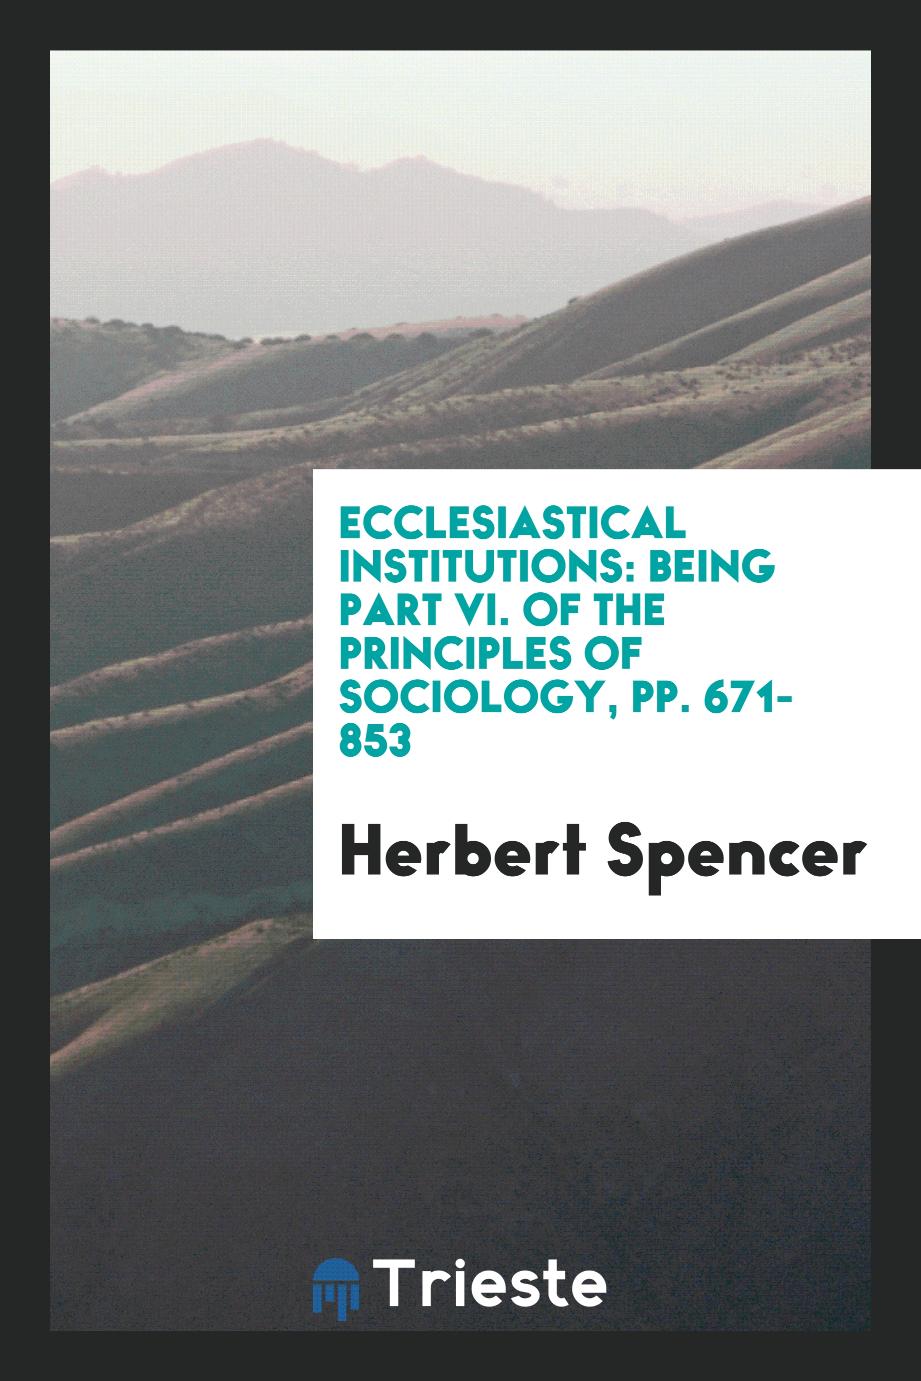 Ecclesiastical Institutions: Being Part VI. of the Principles of Sociology, pp. 671-853